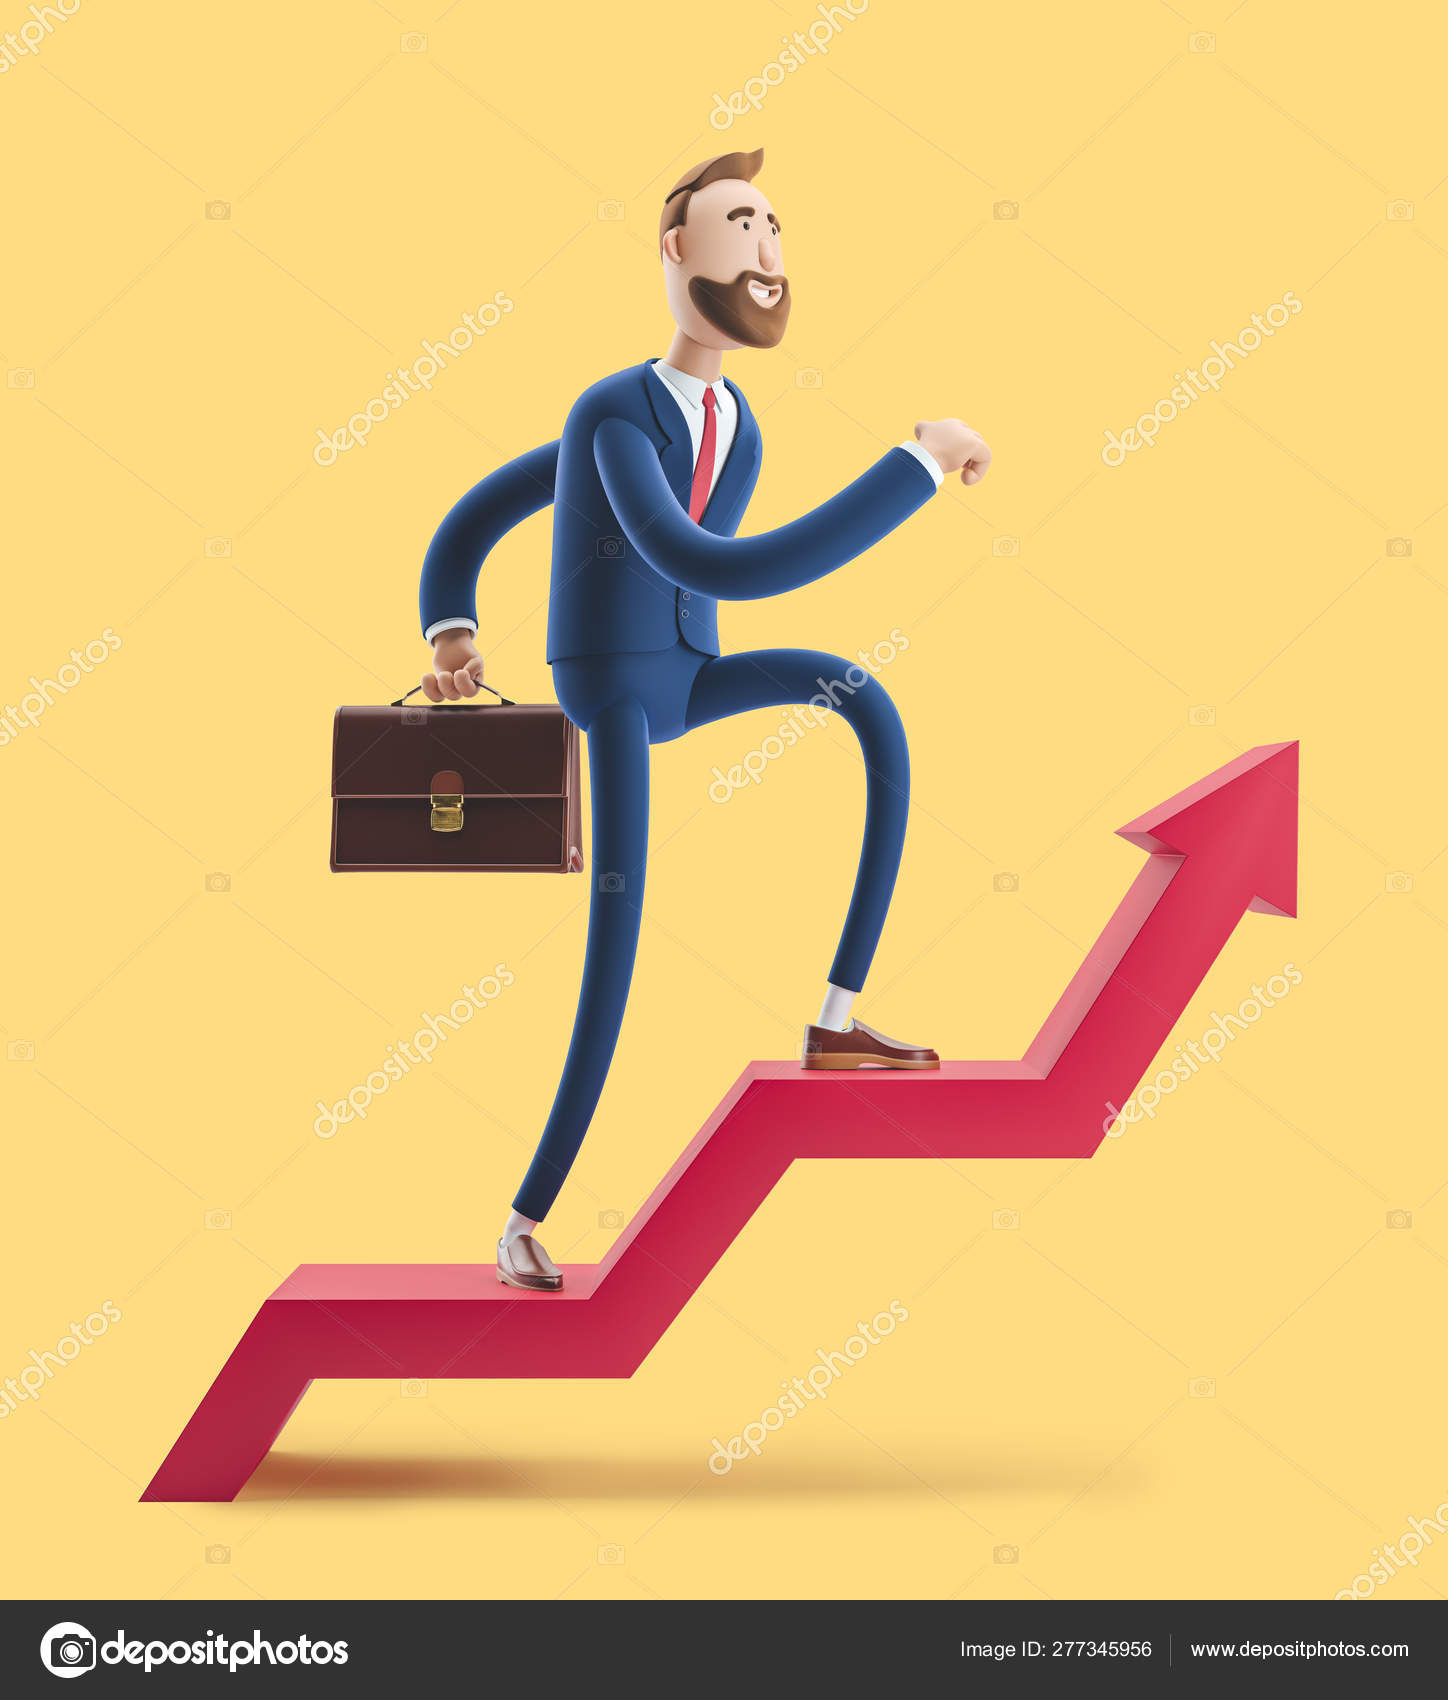 Cartoon character Billy goes to success. 3d illustration on yellow  background. Concept of financial growth. Dashboard with the analysis of  finance Stock Photo by ©bestpixels 277345956